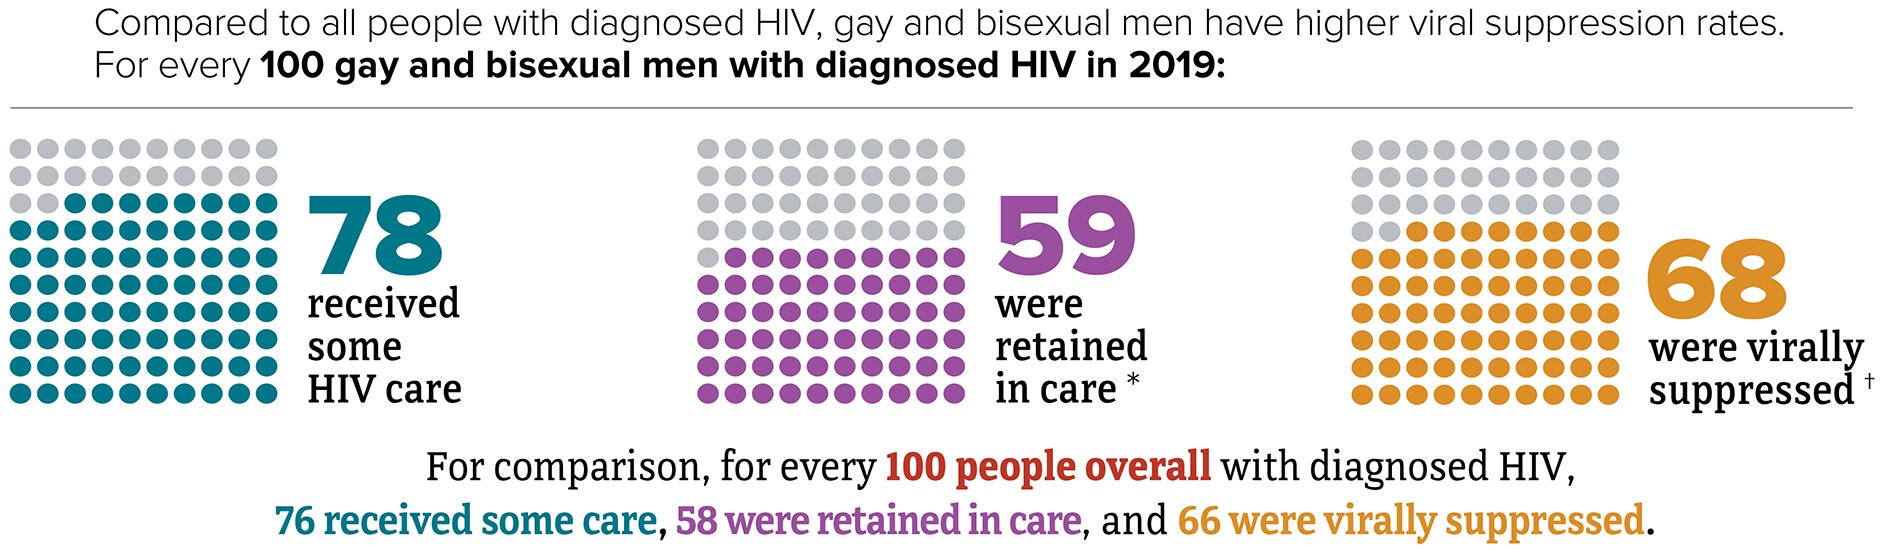 In 2019, for every 100 gay and bisexual men with diagnosed HIV, 68 were virally suppressed.